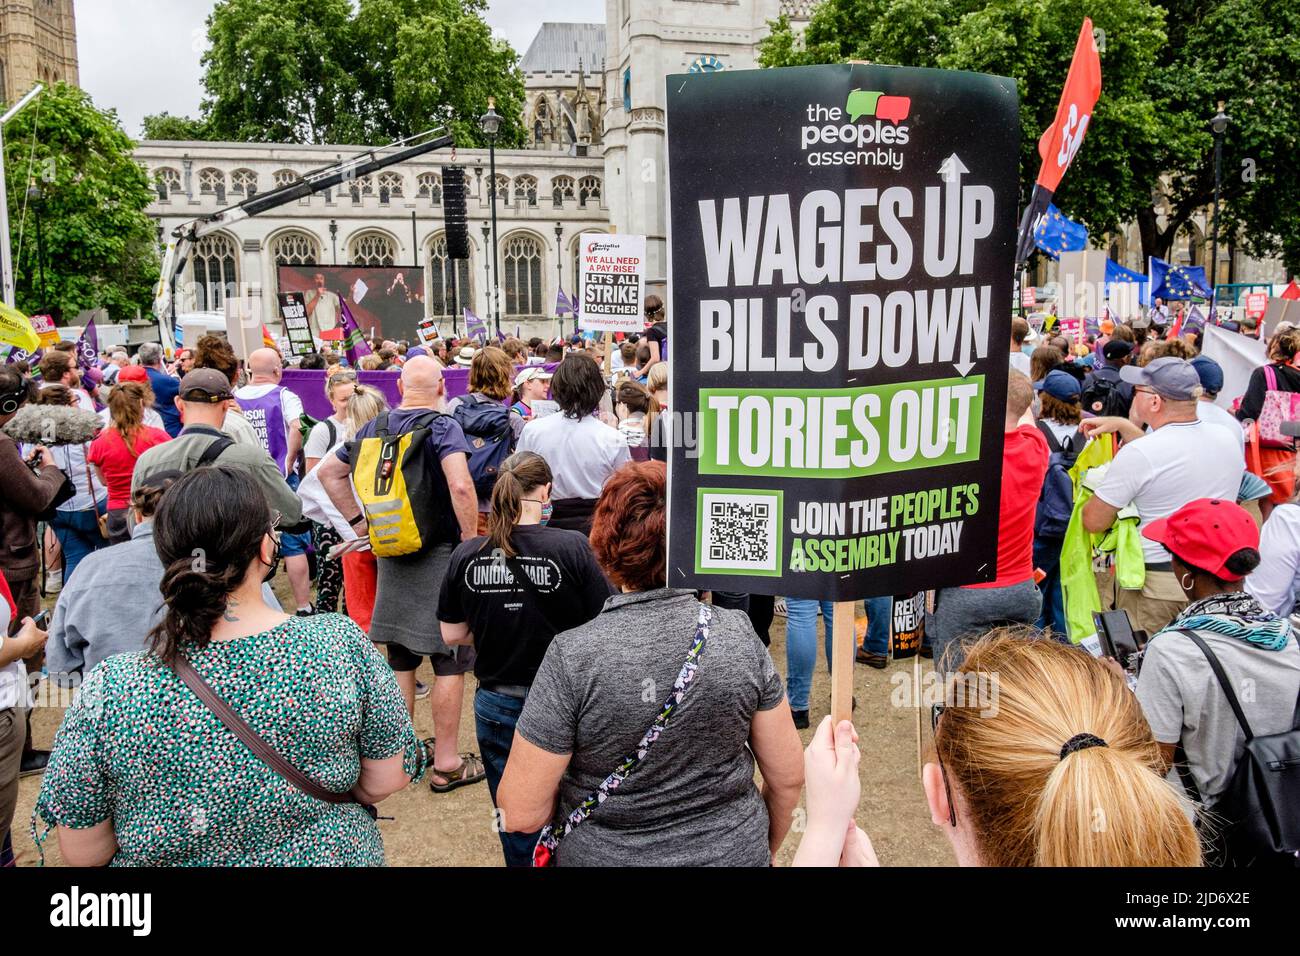 London UK, 18th May 2022. Thousands of trade union members march on the We Demand Better protest organised by the TUC against the UK government and the cost of living crisis. Placards call for a rise in workers' wages and reduction in household bills. Stock Photo